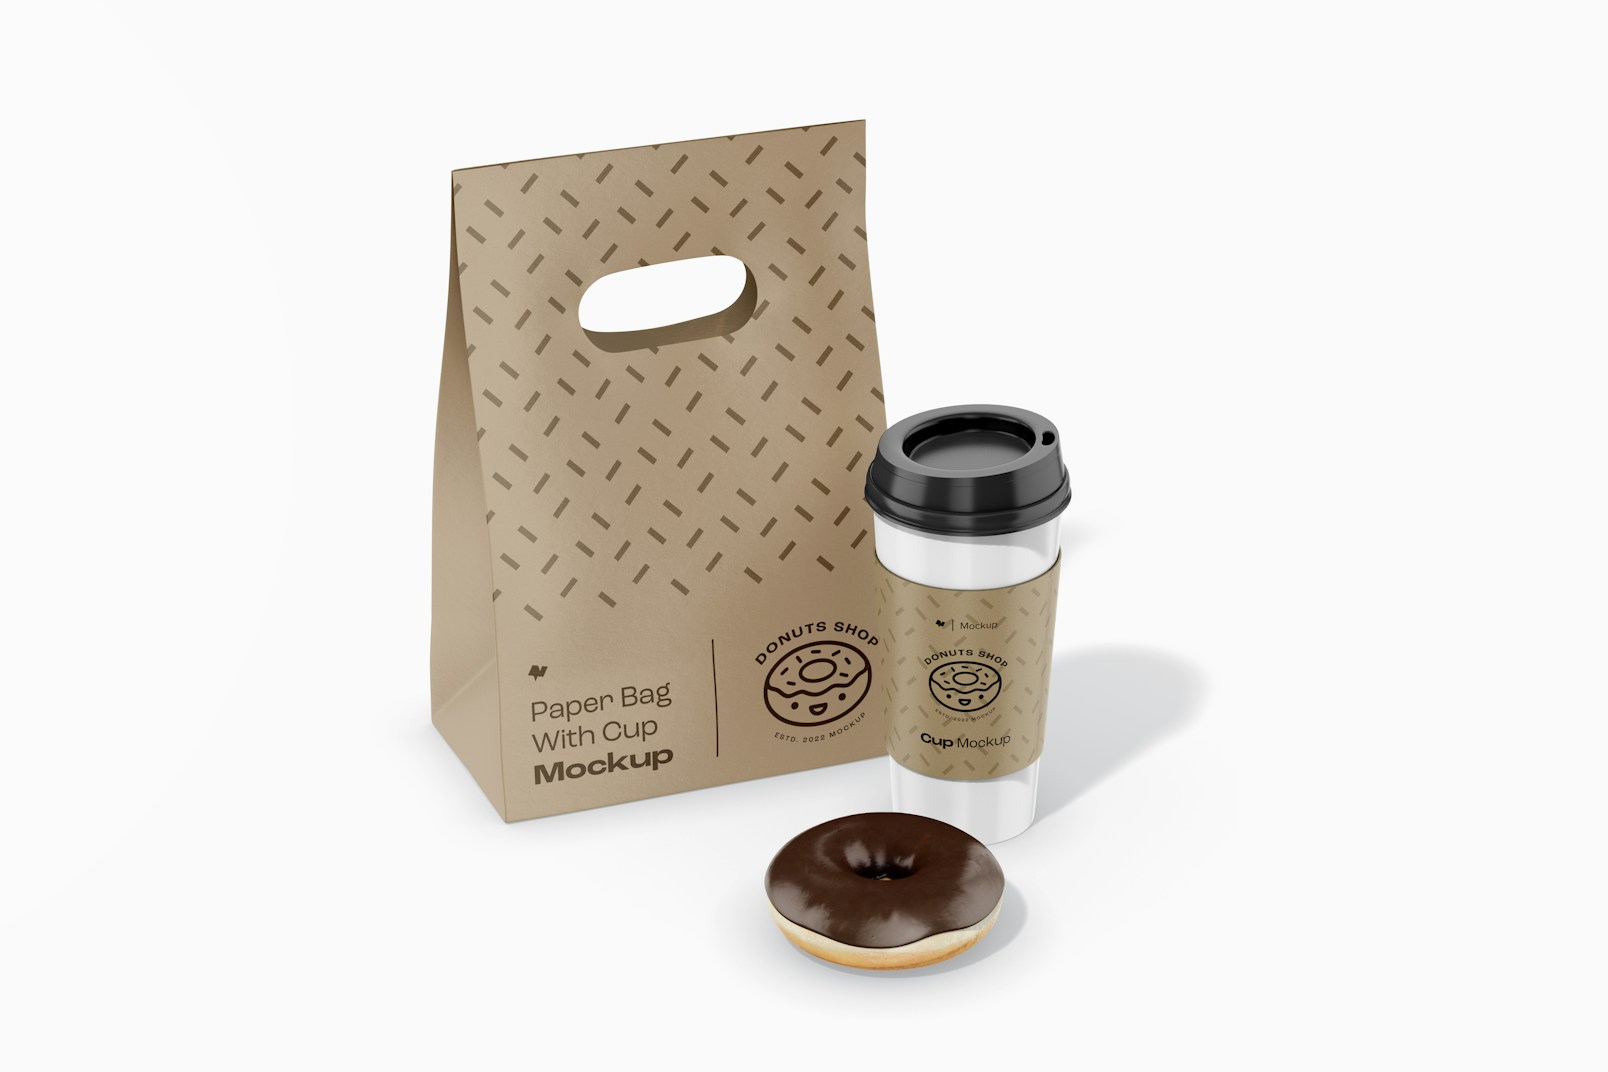 Paper Bag with Cup Mockup, Perspective